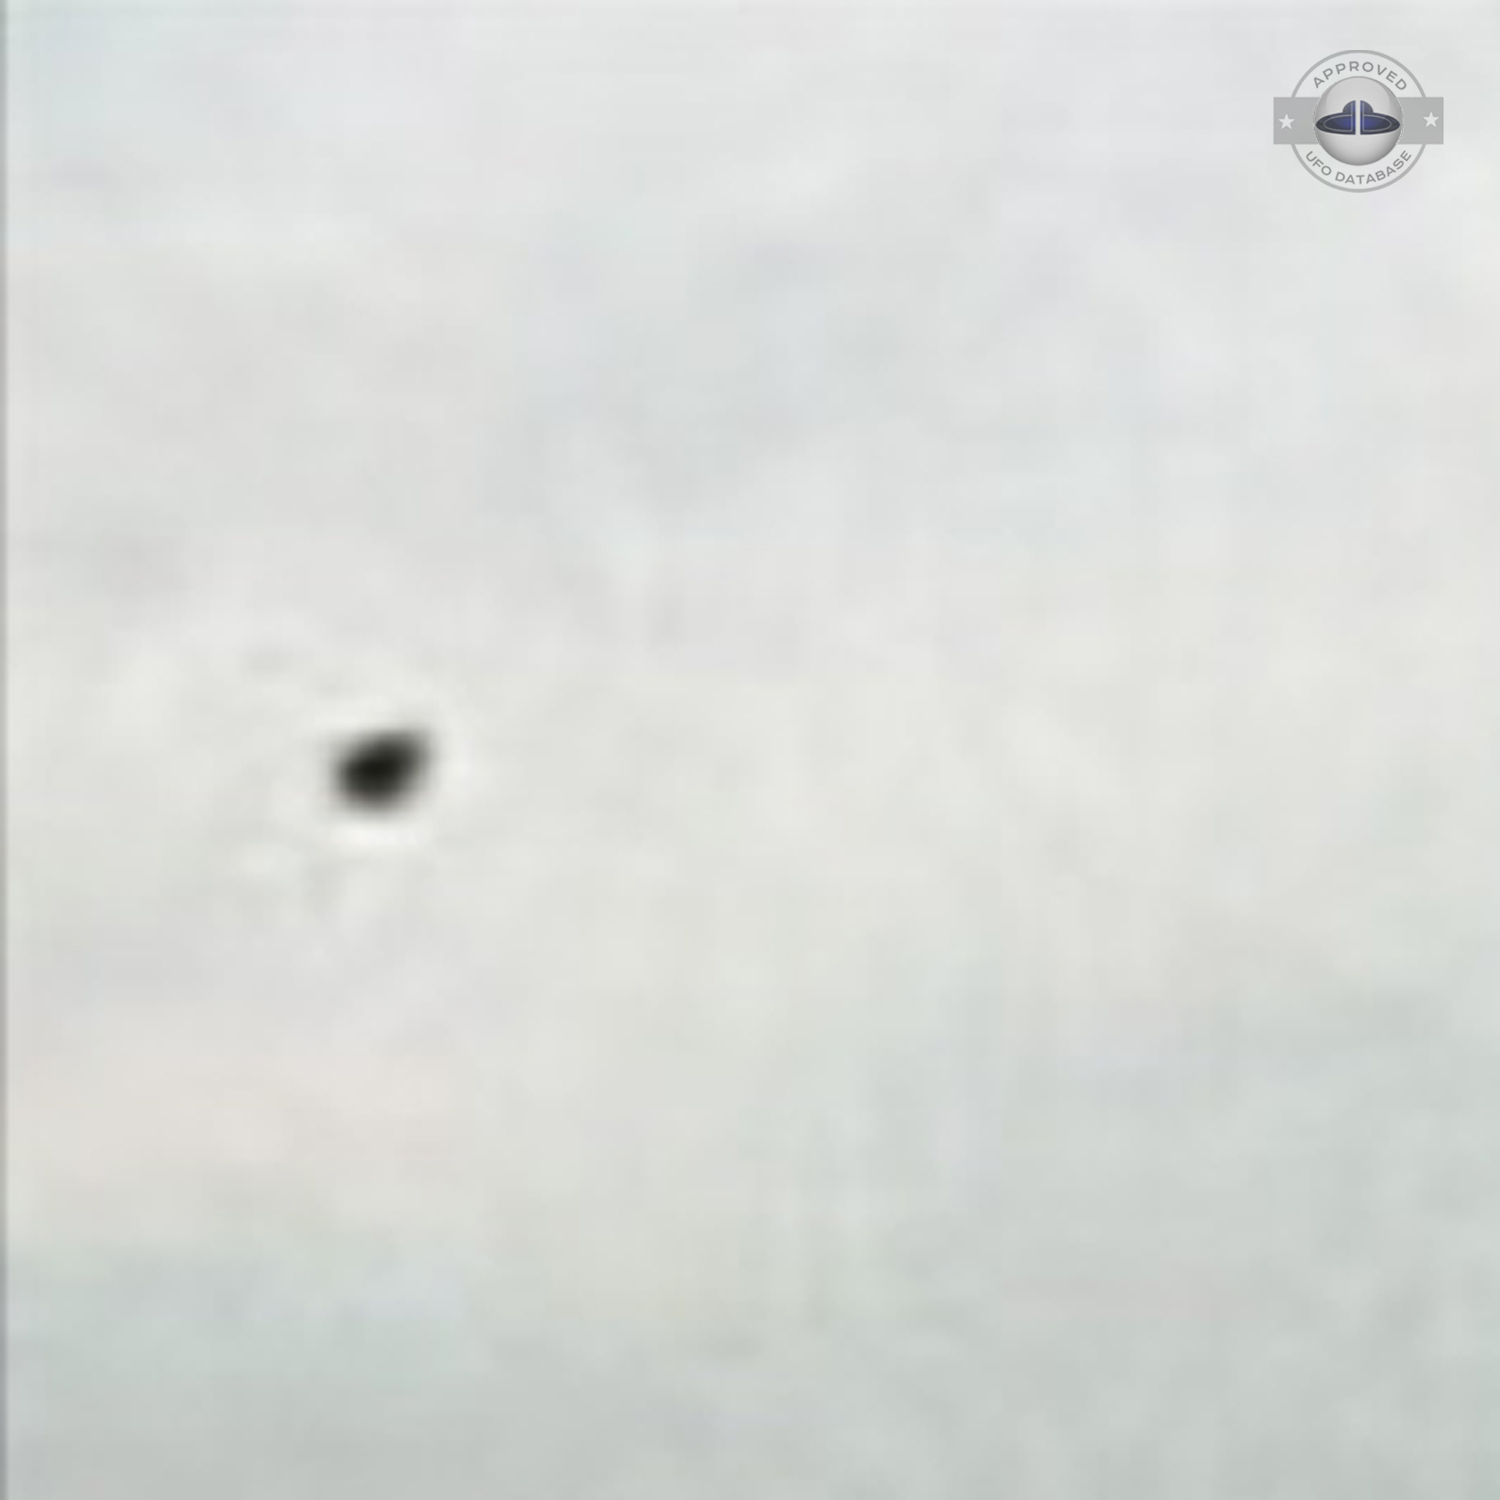 Web cam capture UFO picture over island of Cheung Chauen | Hong Kong UFO Picture #226-4